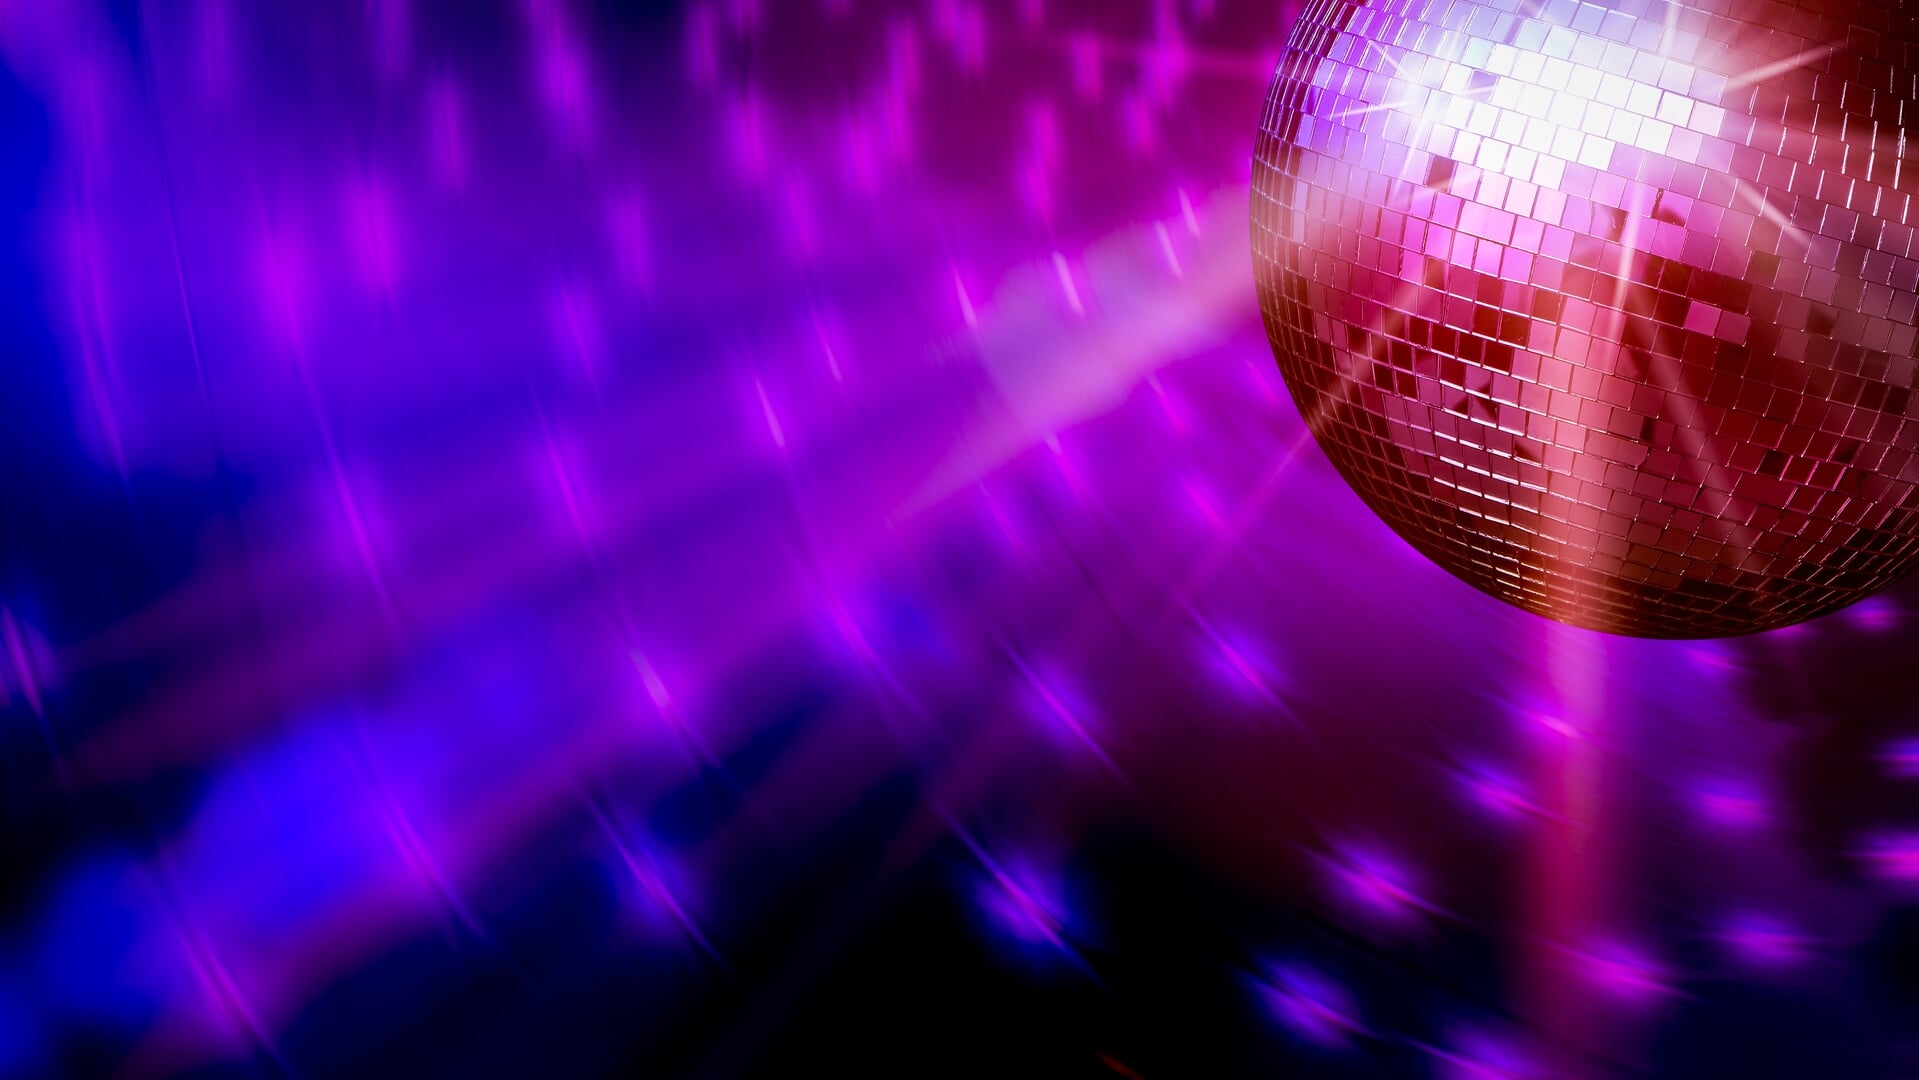 disco ball background space backdrop light discoball nightclub design graphic concept - stock image